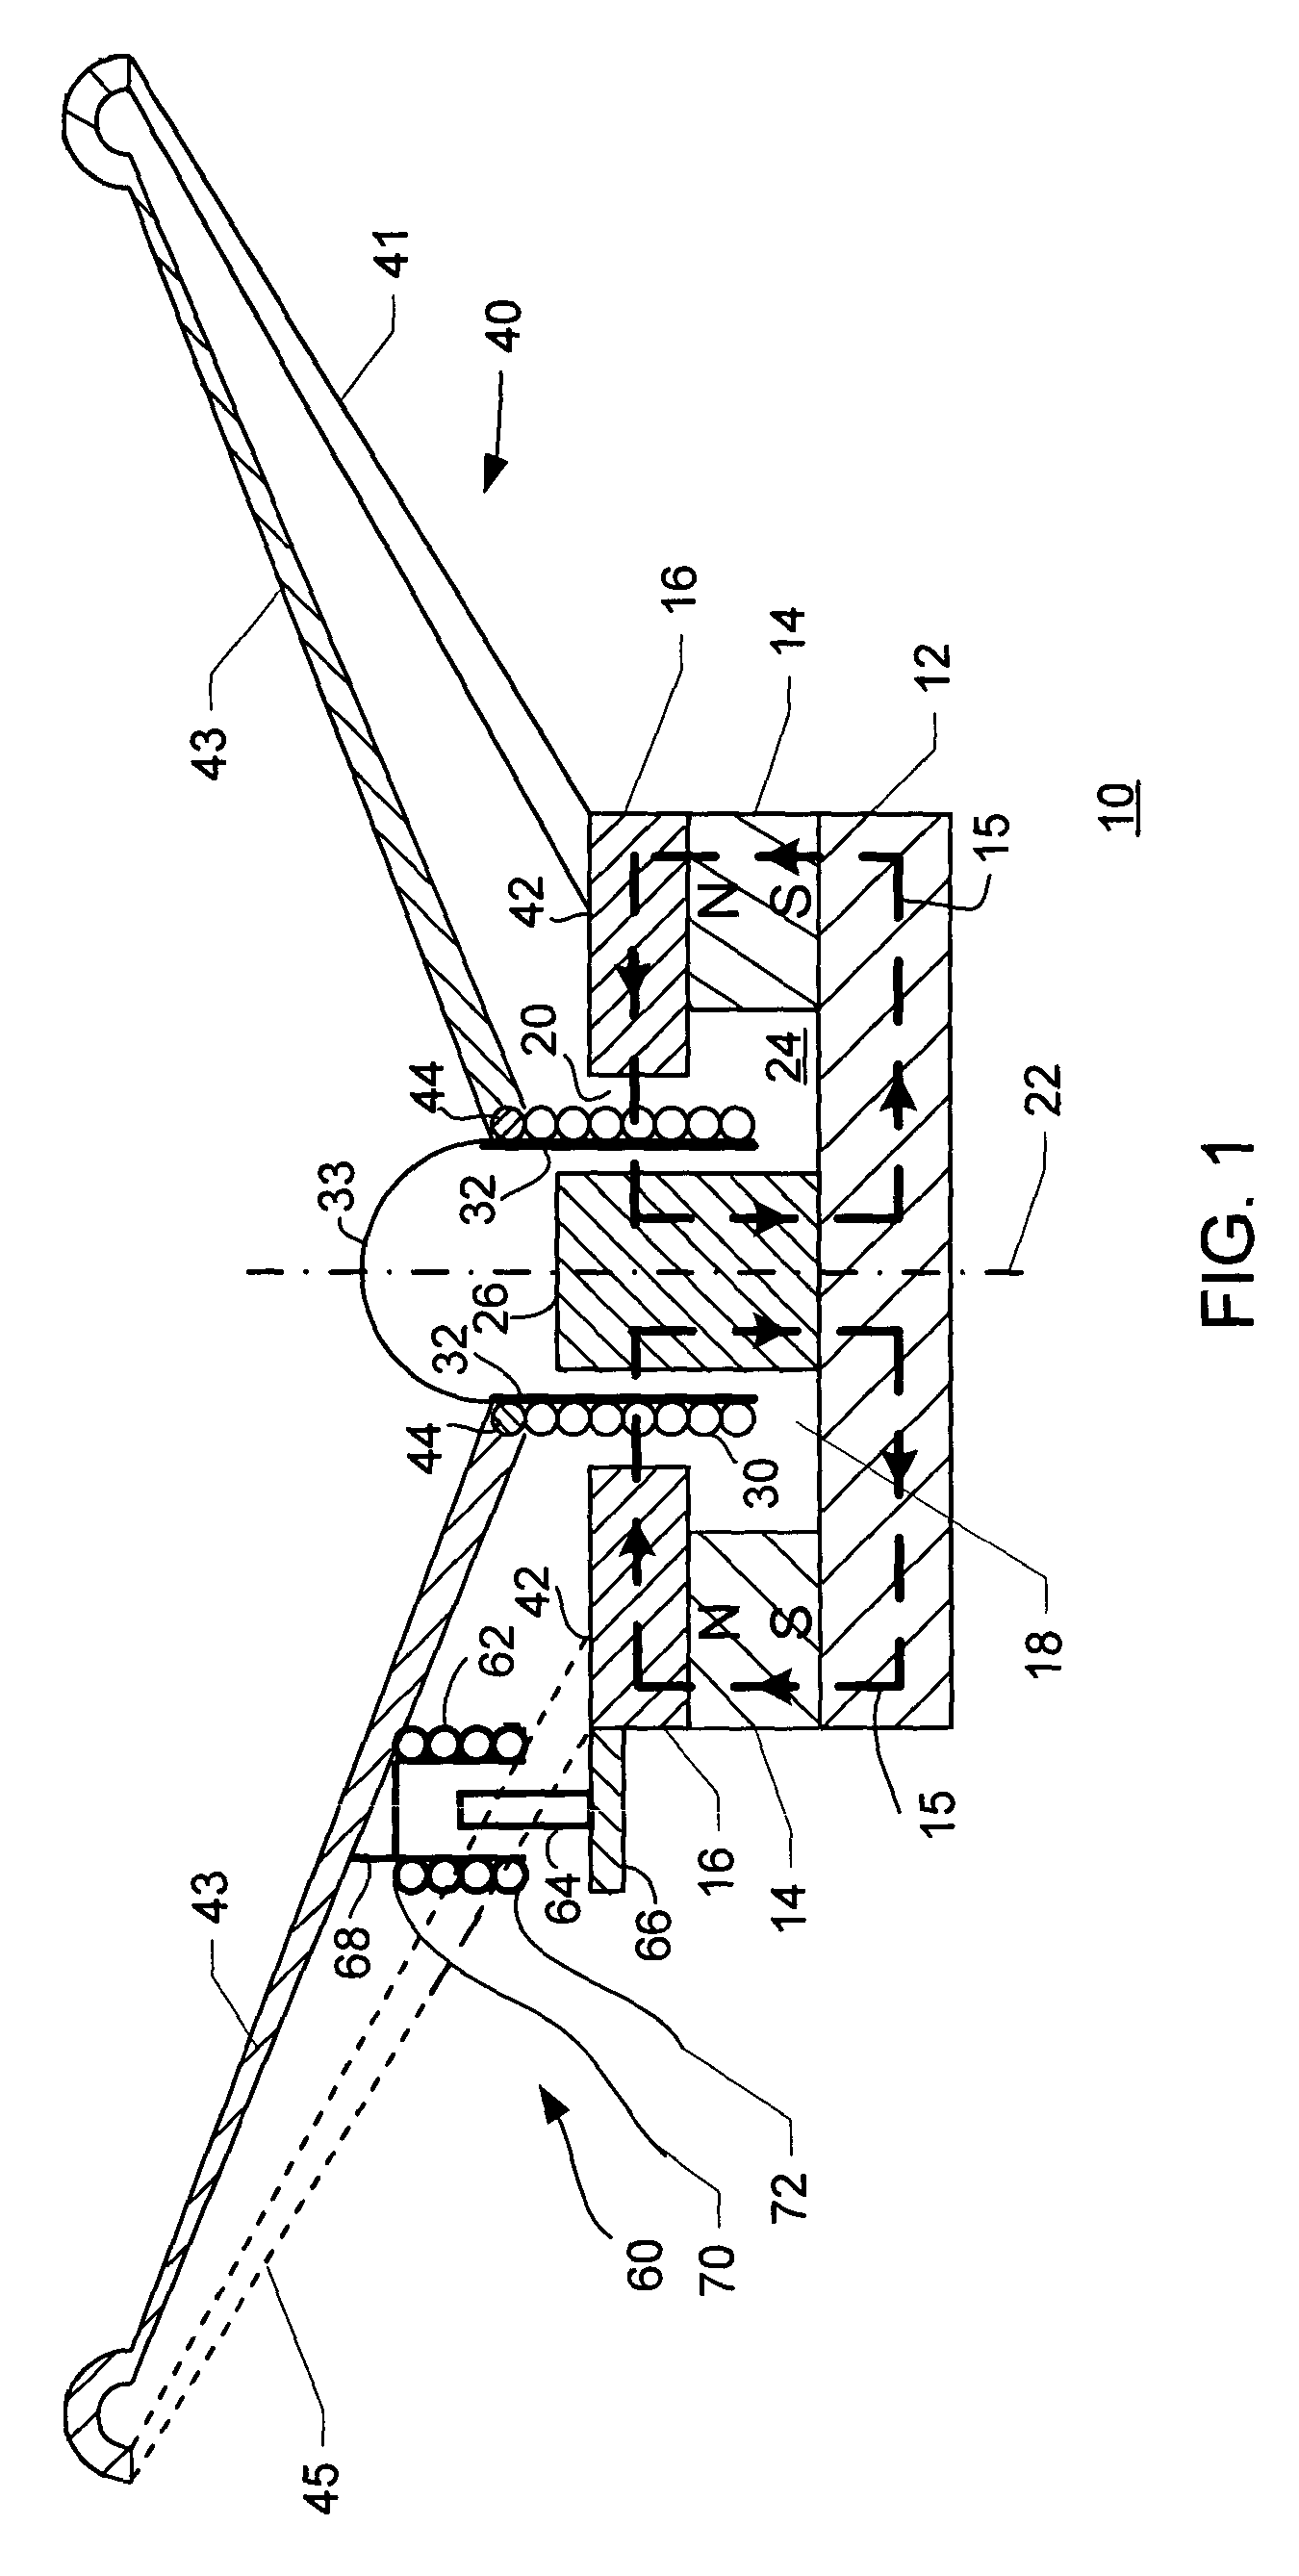 Apparatus and method for monitoring speaker cone displacement in an audio speaker